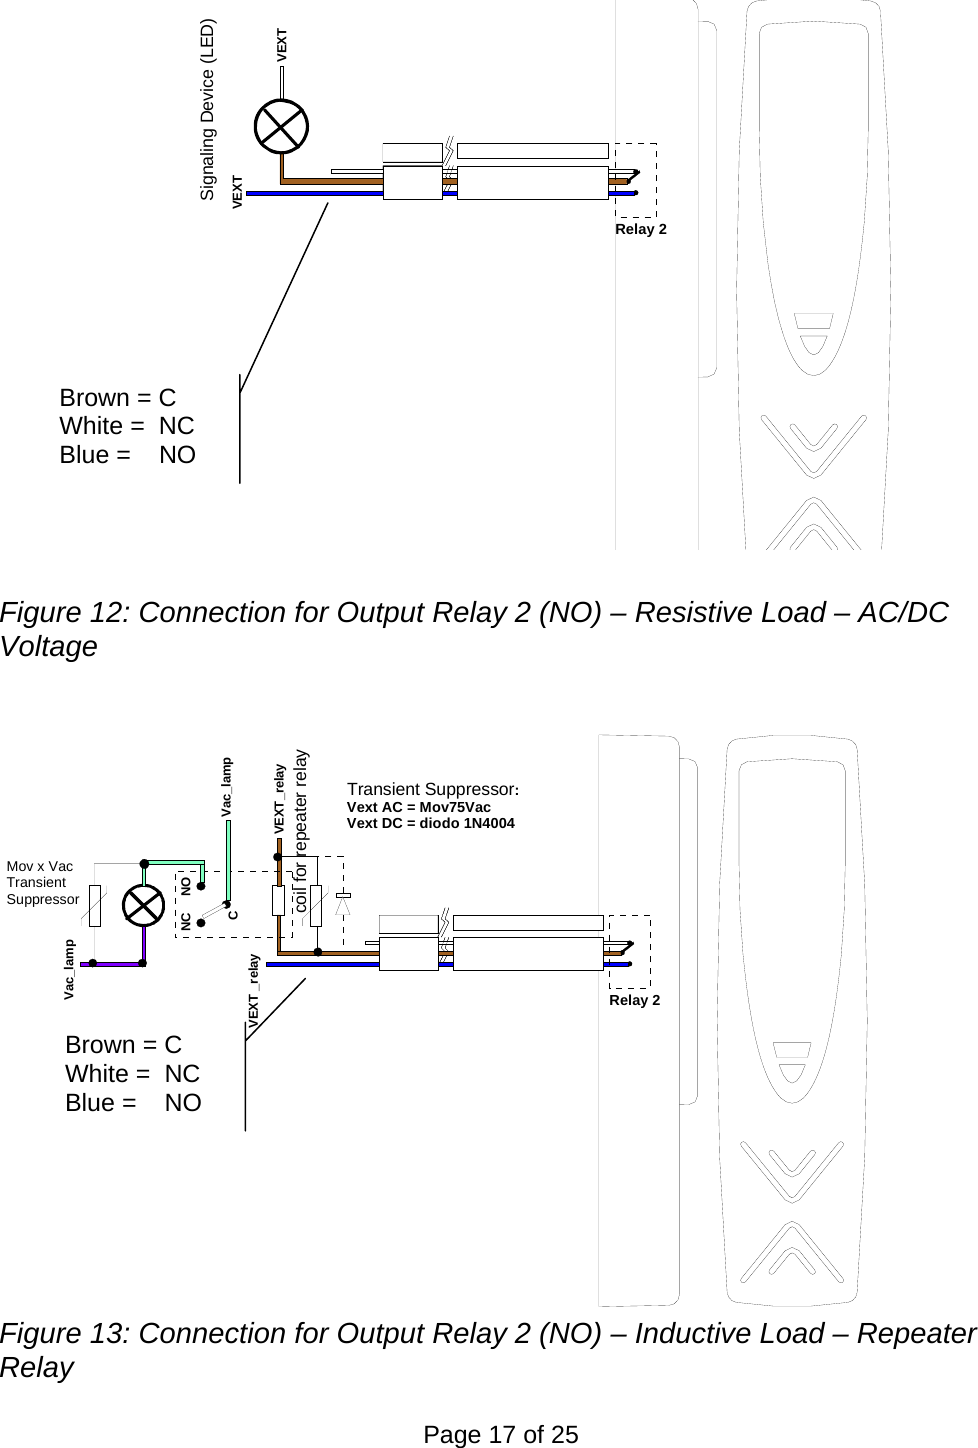 VEXTVEXTSignaling Device (LED)Relay 2 Brown = C White =  NC Blue =    NO Figure 12: Connection for Output Relay 2 (NO) – Resistive Load – AC/DC Voltage VEXT_relayVEXT _relaycoil for repeater relayTransient Suppressor:Vext AC = Mov75Vac Vext DC = diodo 1N4004Relay 2Mov x Vac Transient SuppressorVac_lampVac_lampCNC NOFigure 13: Connection for Output Relay 2 (NO) – Inductive Load – Repeater Relay Brown = C White =  NC Blue =    NO Page 17 of 25 